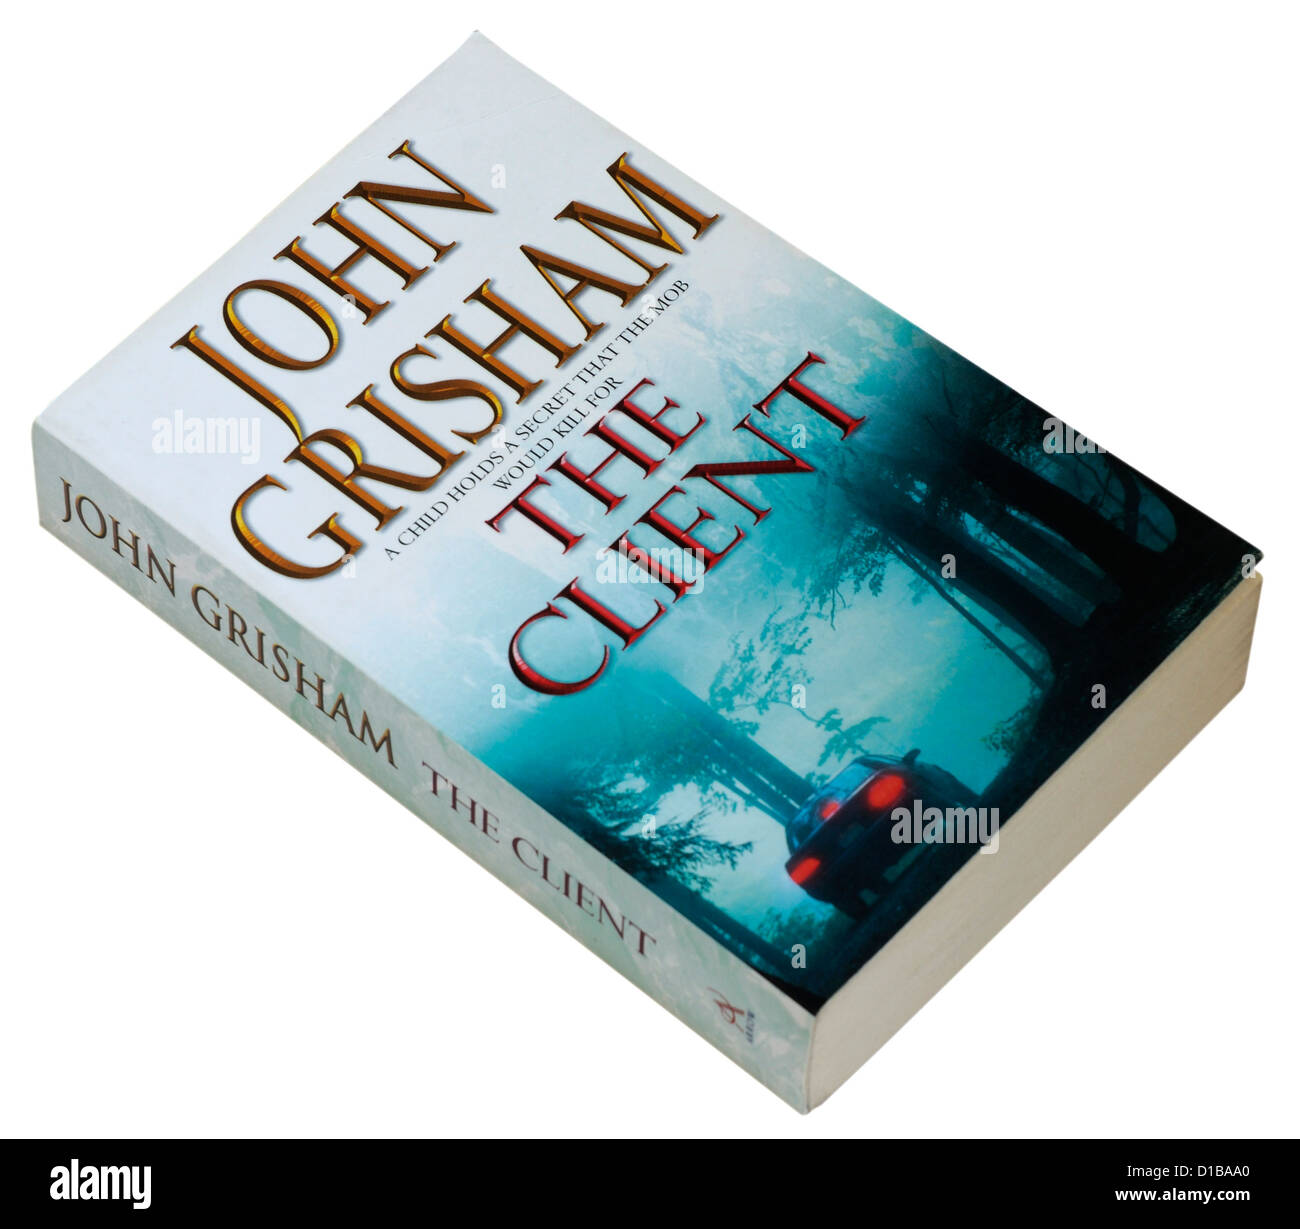 The Client by John Grisham Stock Photo